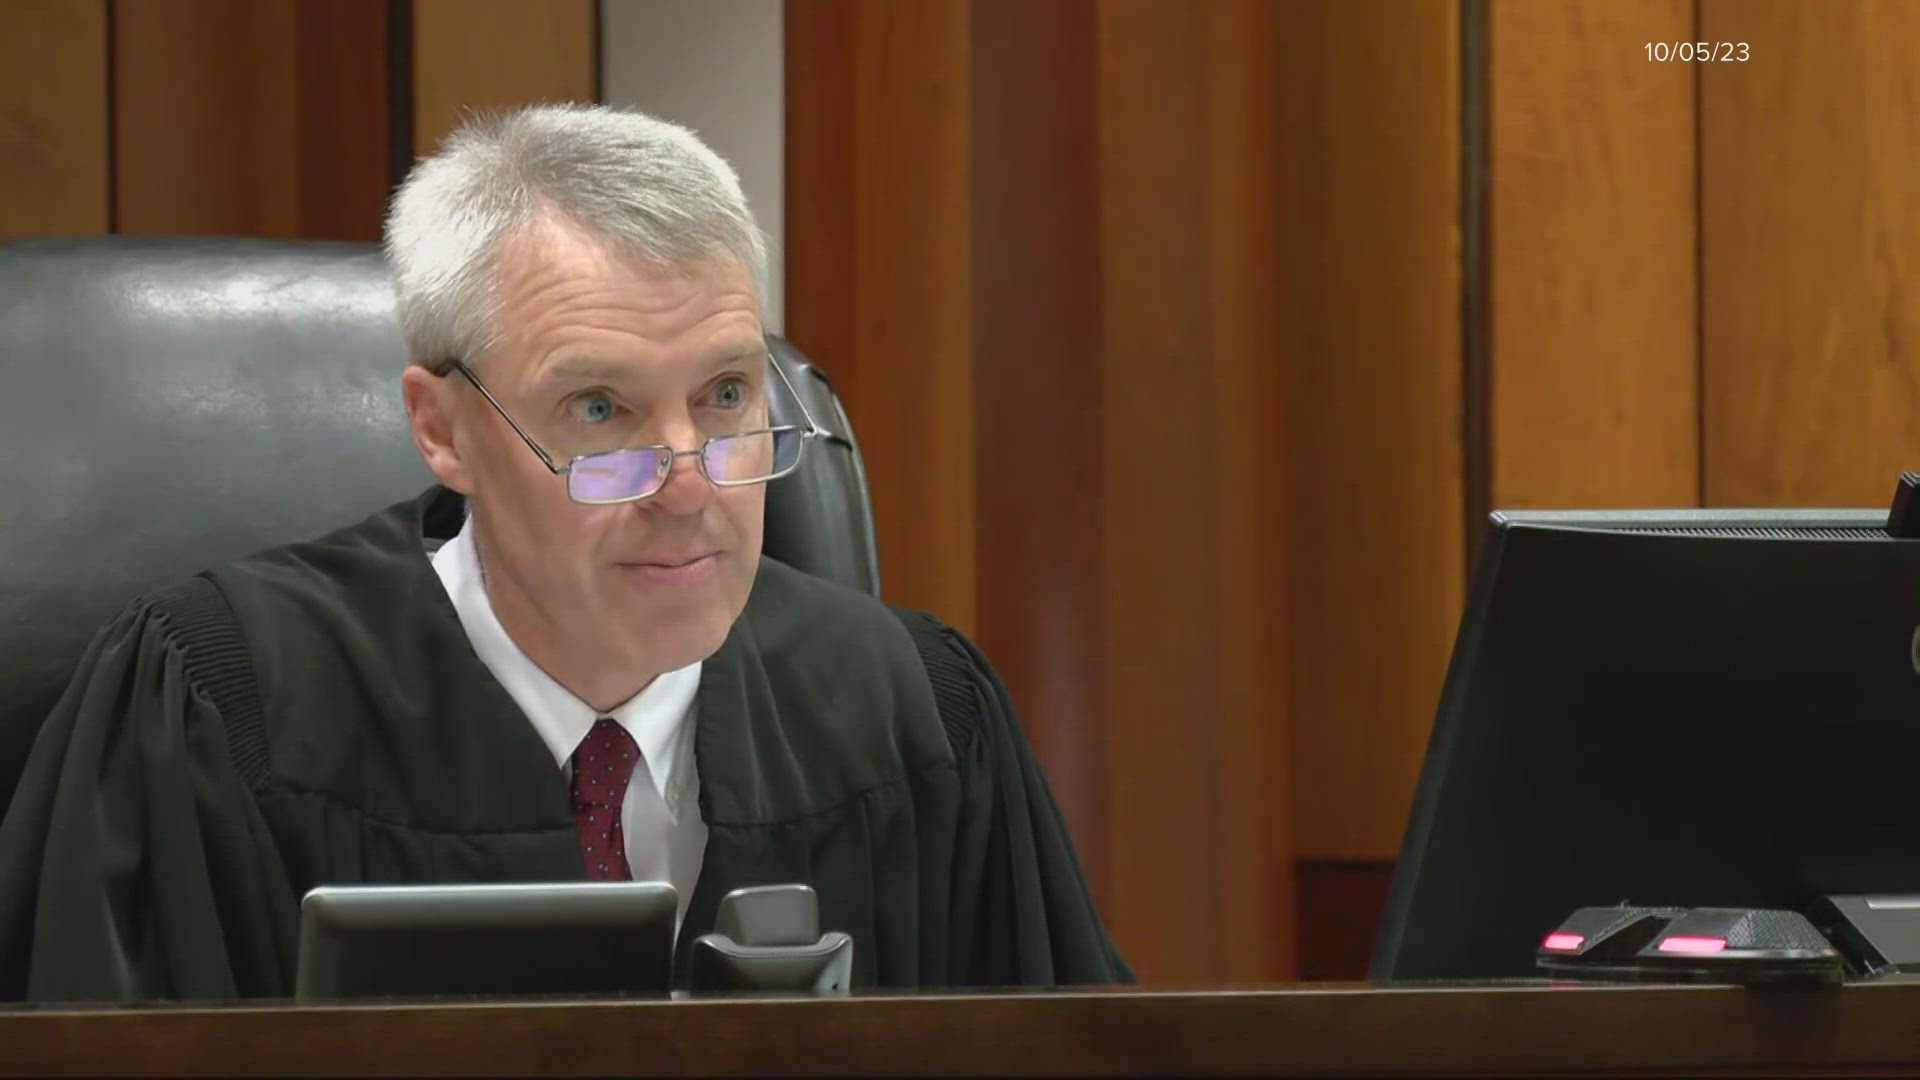 The Kentucky Supreme Court is sending the case back to Nelson County, asking Houck’s attorneys to file a motion asking Judge Charles Simms to recuse himself.